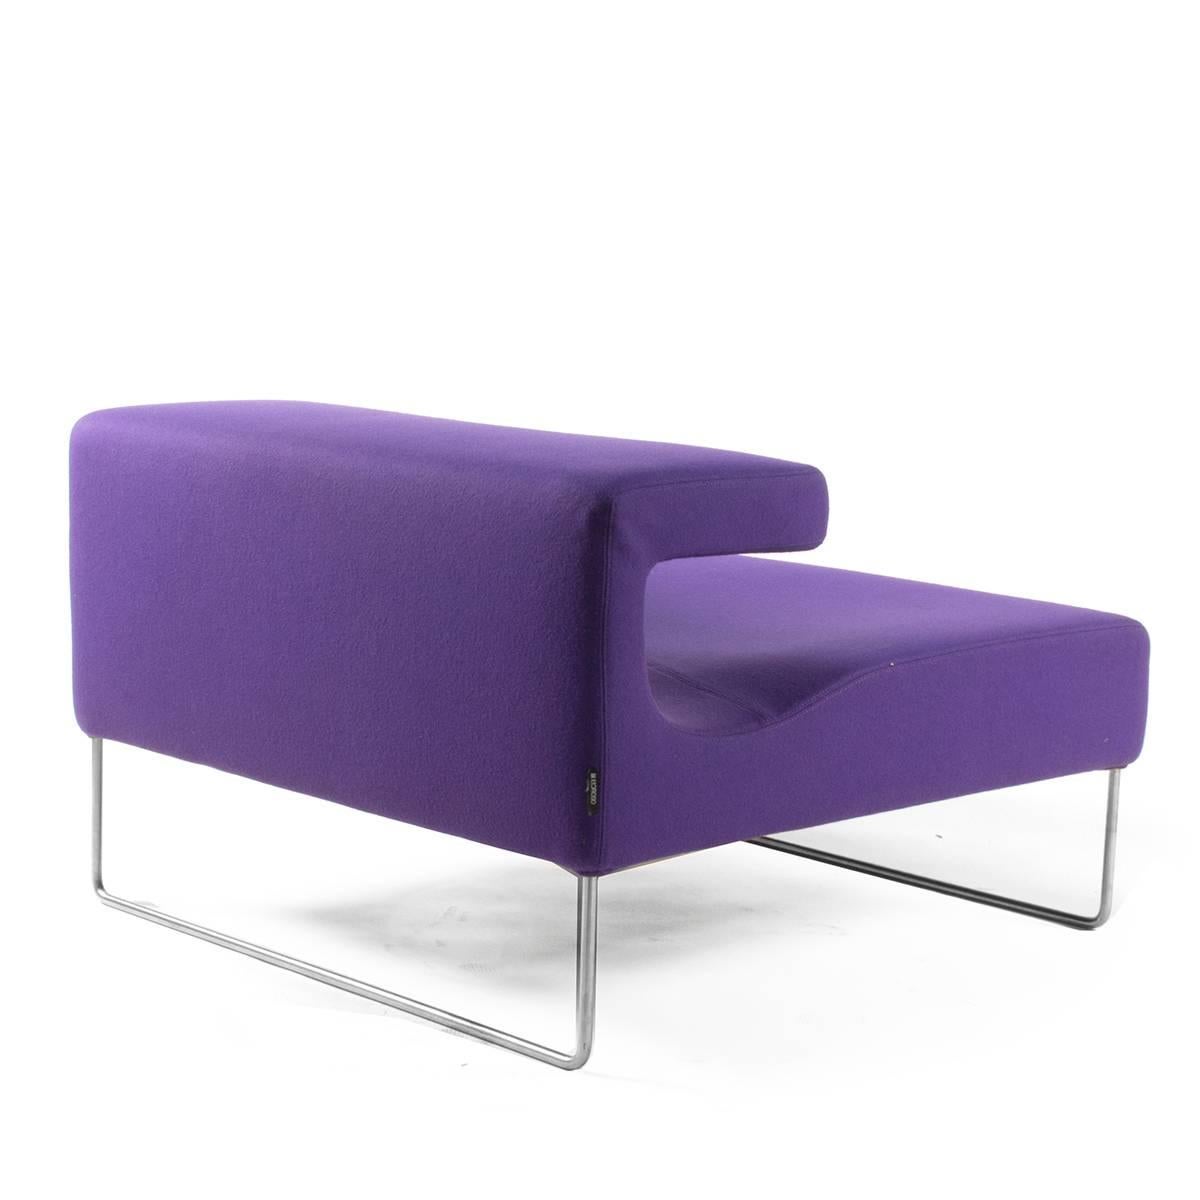 Italian Purple Moroso Chaise Longue Lowseat Chair by Patricia Urquiola, Italy For Sale